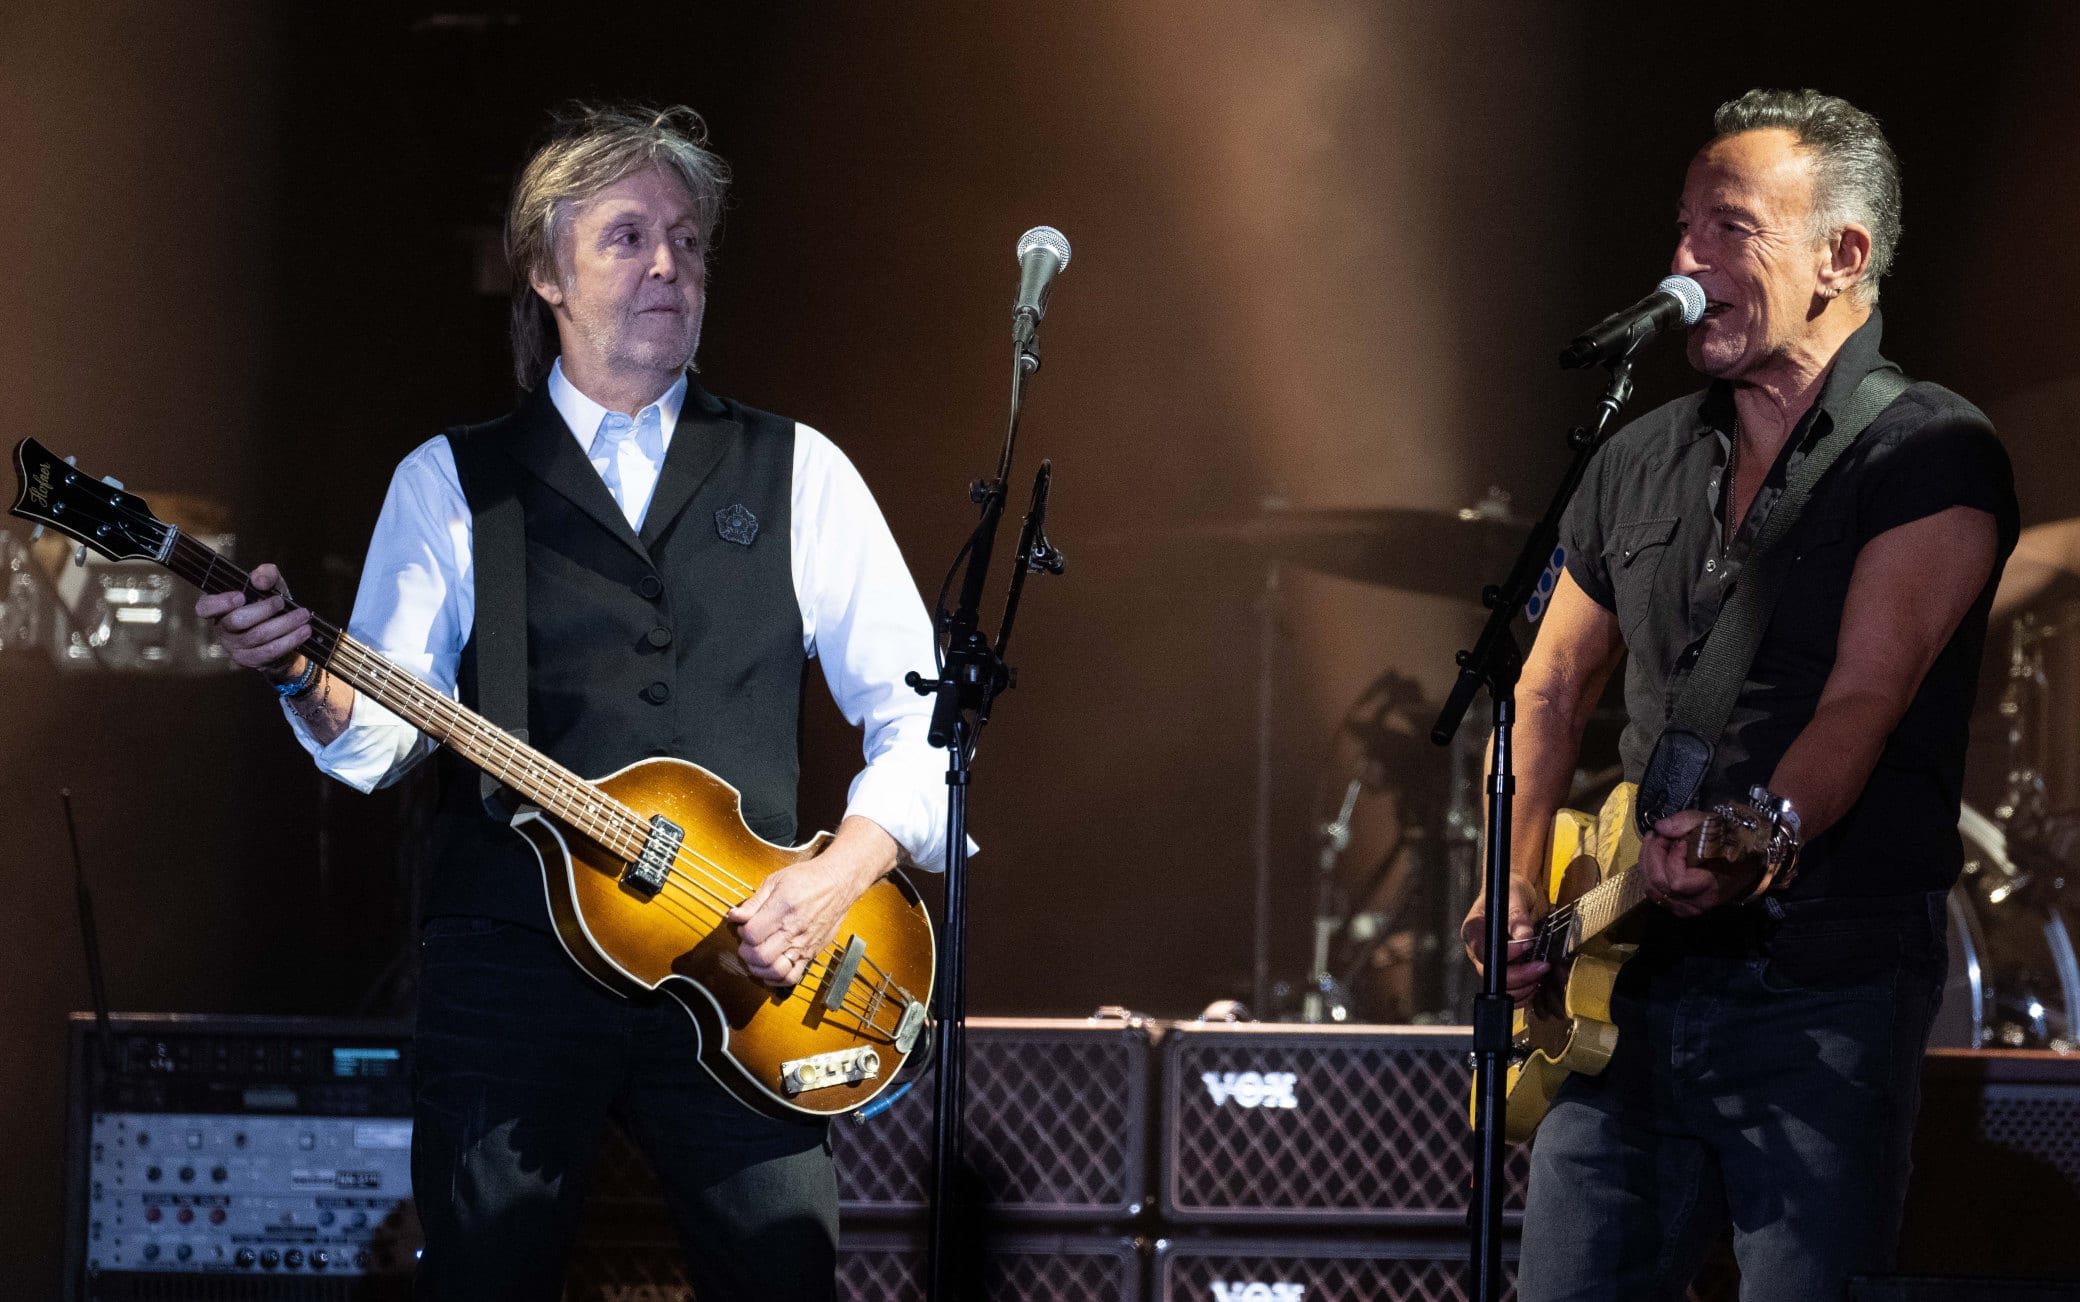 GLASTONBURY, ENGLAND - JUNE 25: Paul McCartney and Bruce Springsteen perform on The Pyramid Stage during day four of Glastonbury Festival at Worthy Farm, Pilton on June 25, 2022 in Glastonbury, England. (Photo by Harry Durrant/Getty Images)